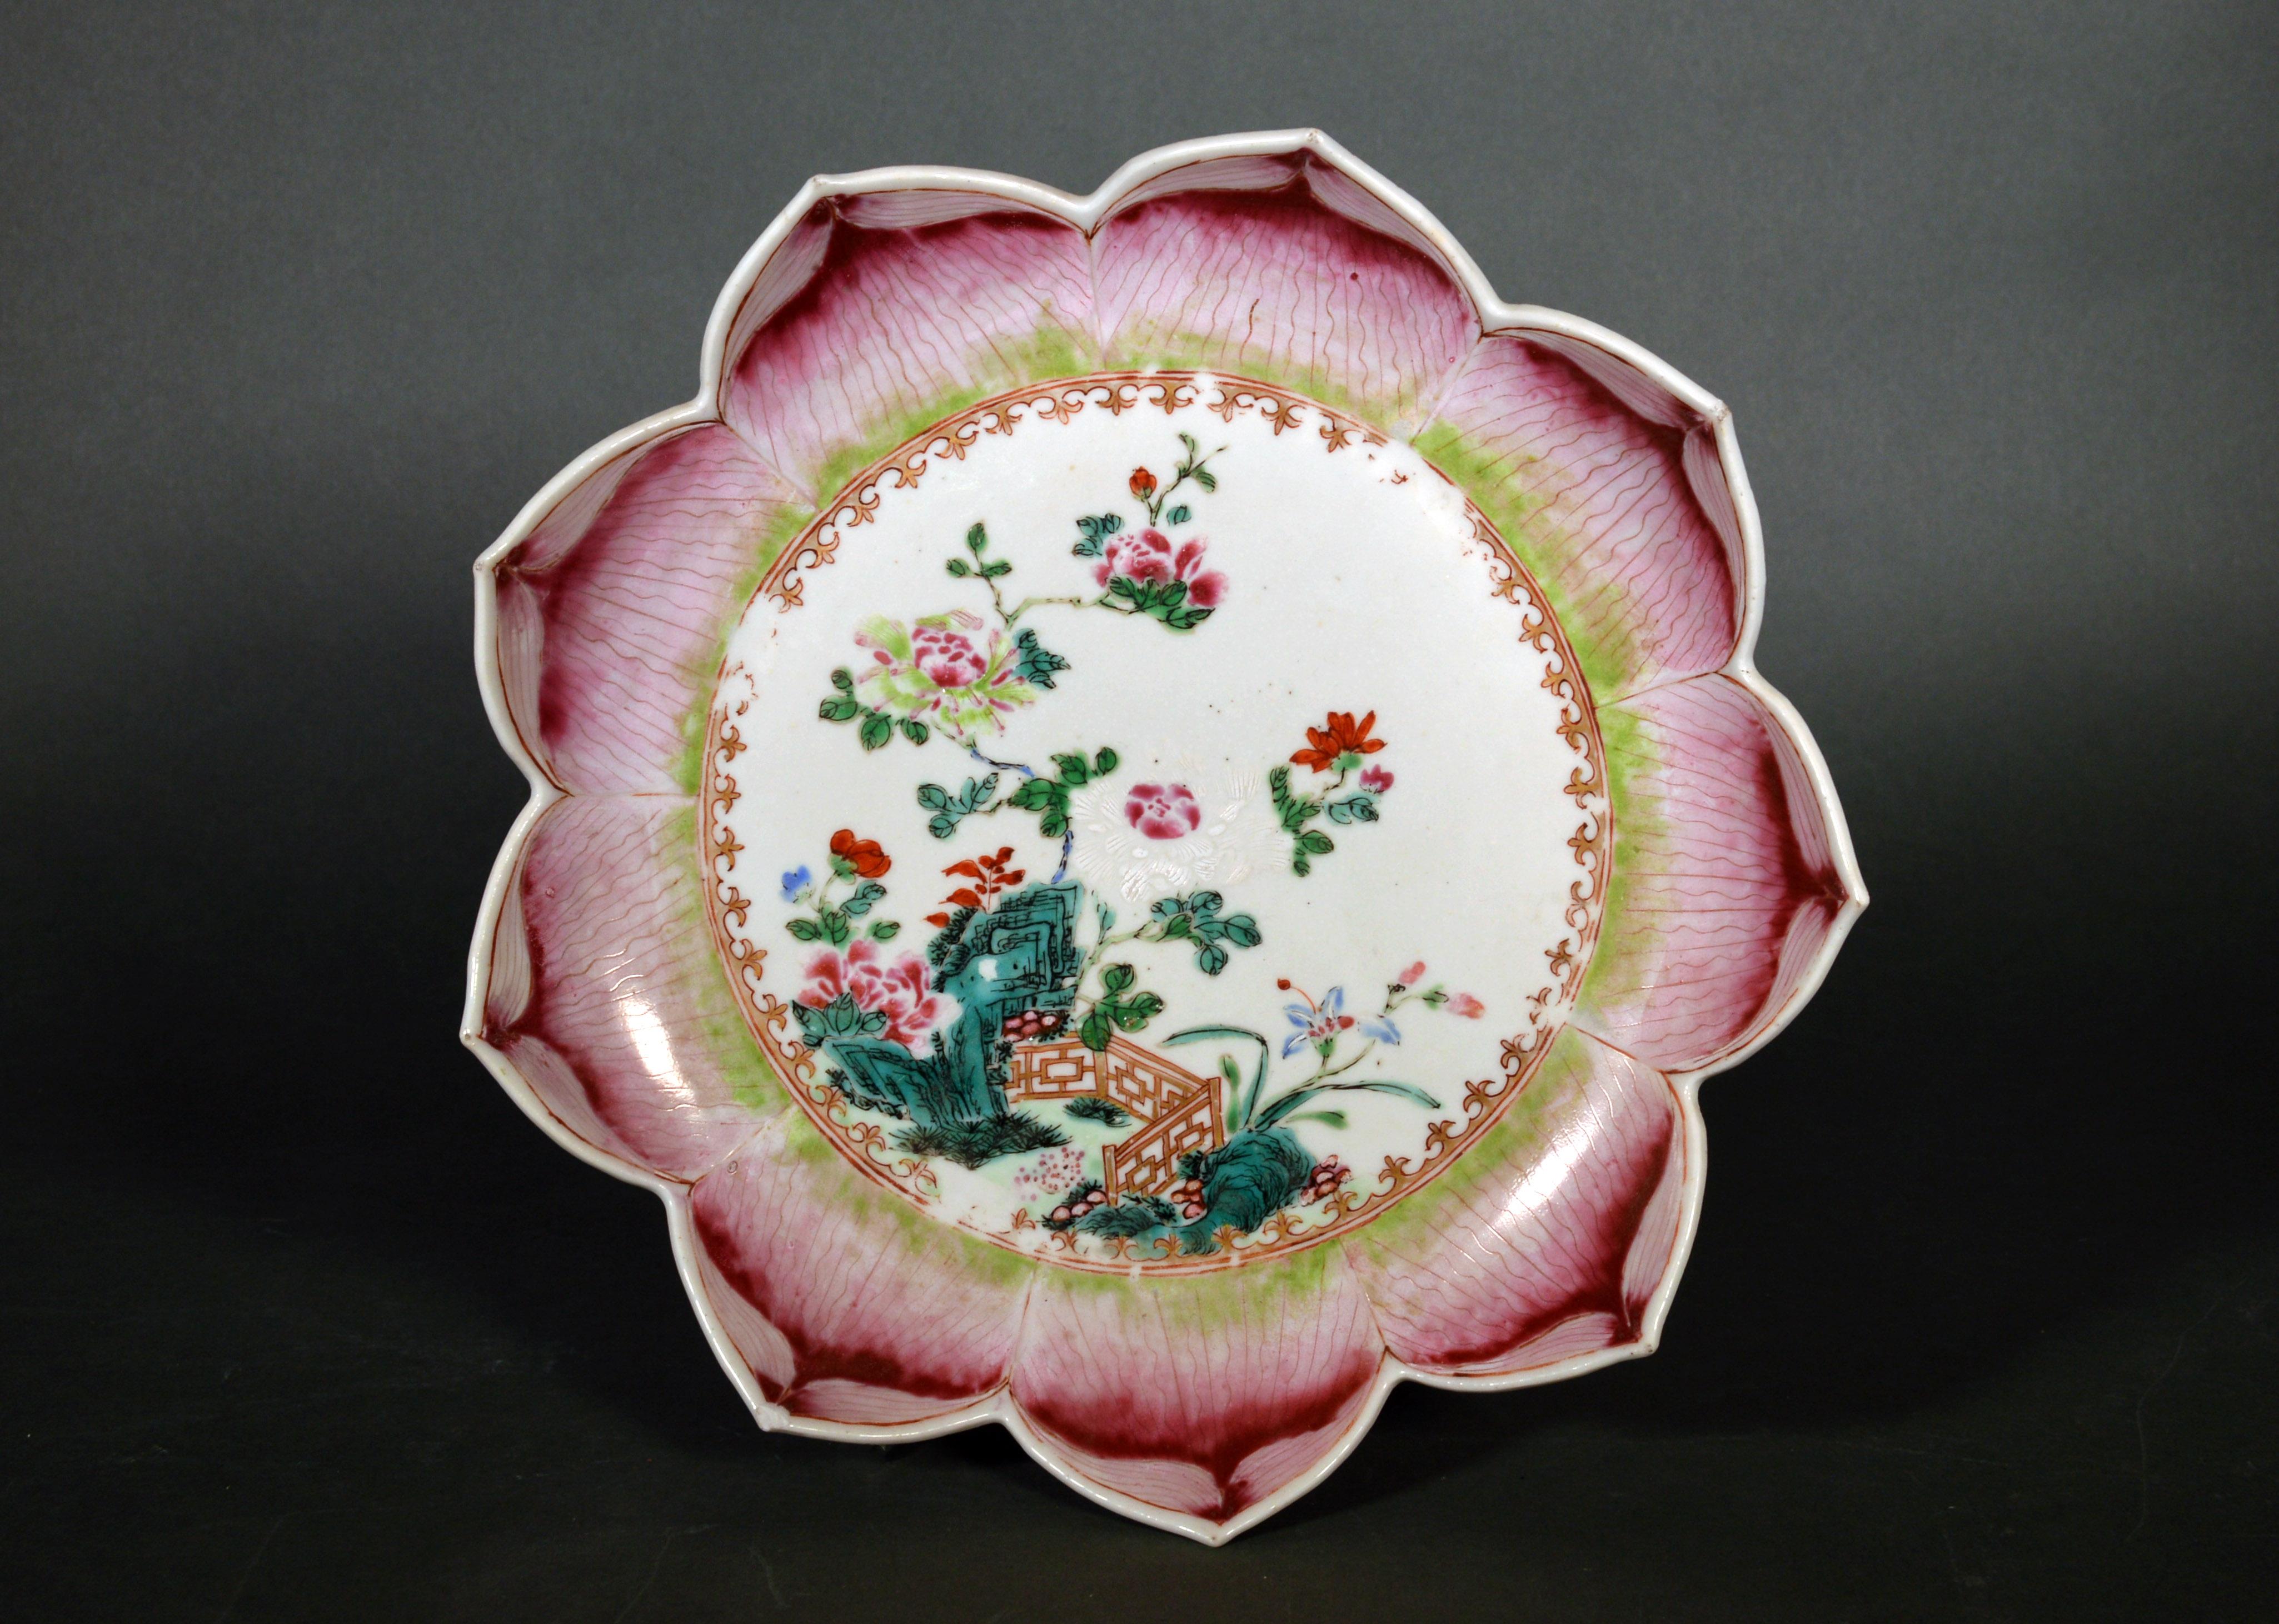 18th-century Chinese Export Porcelain Lotus Leaf Shaped Dishes 2